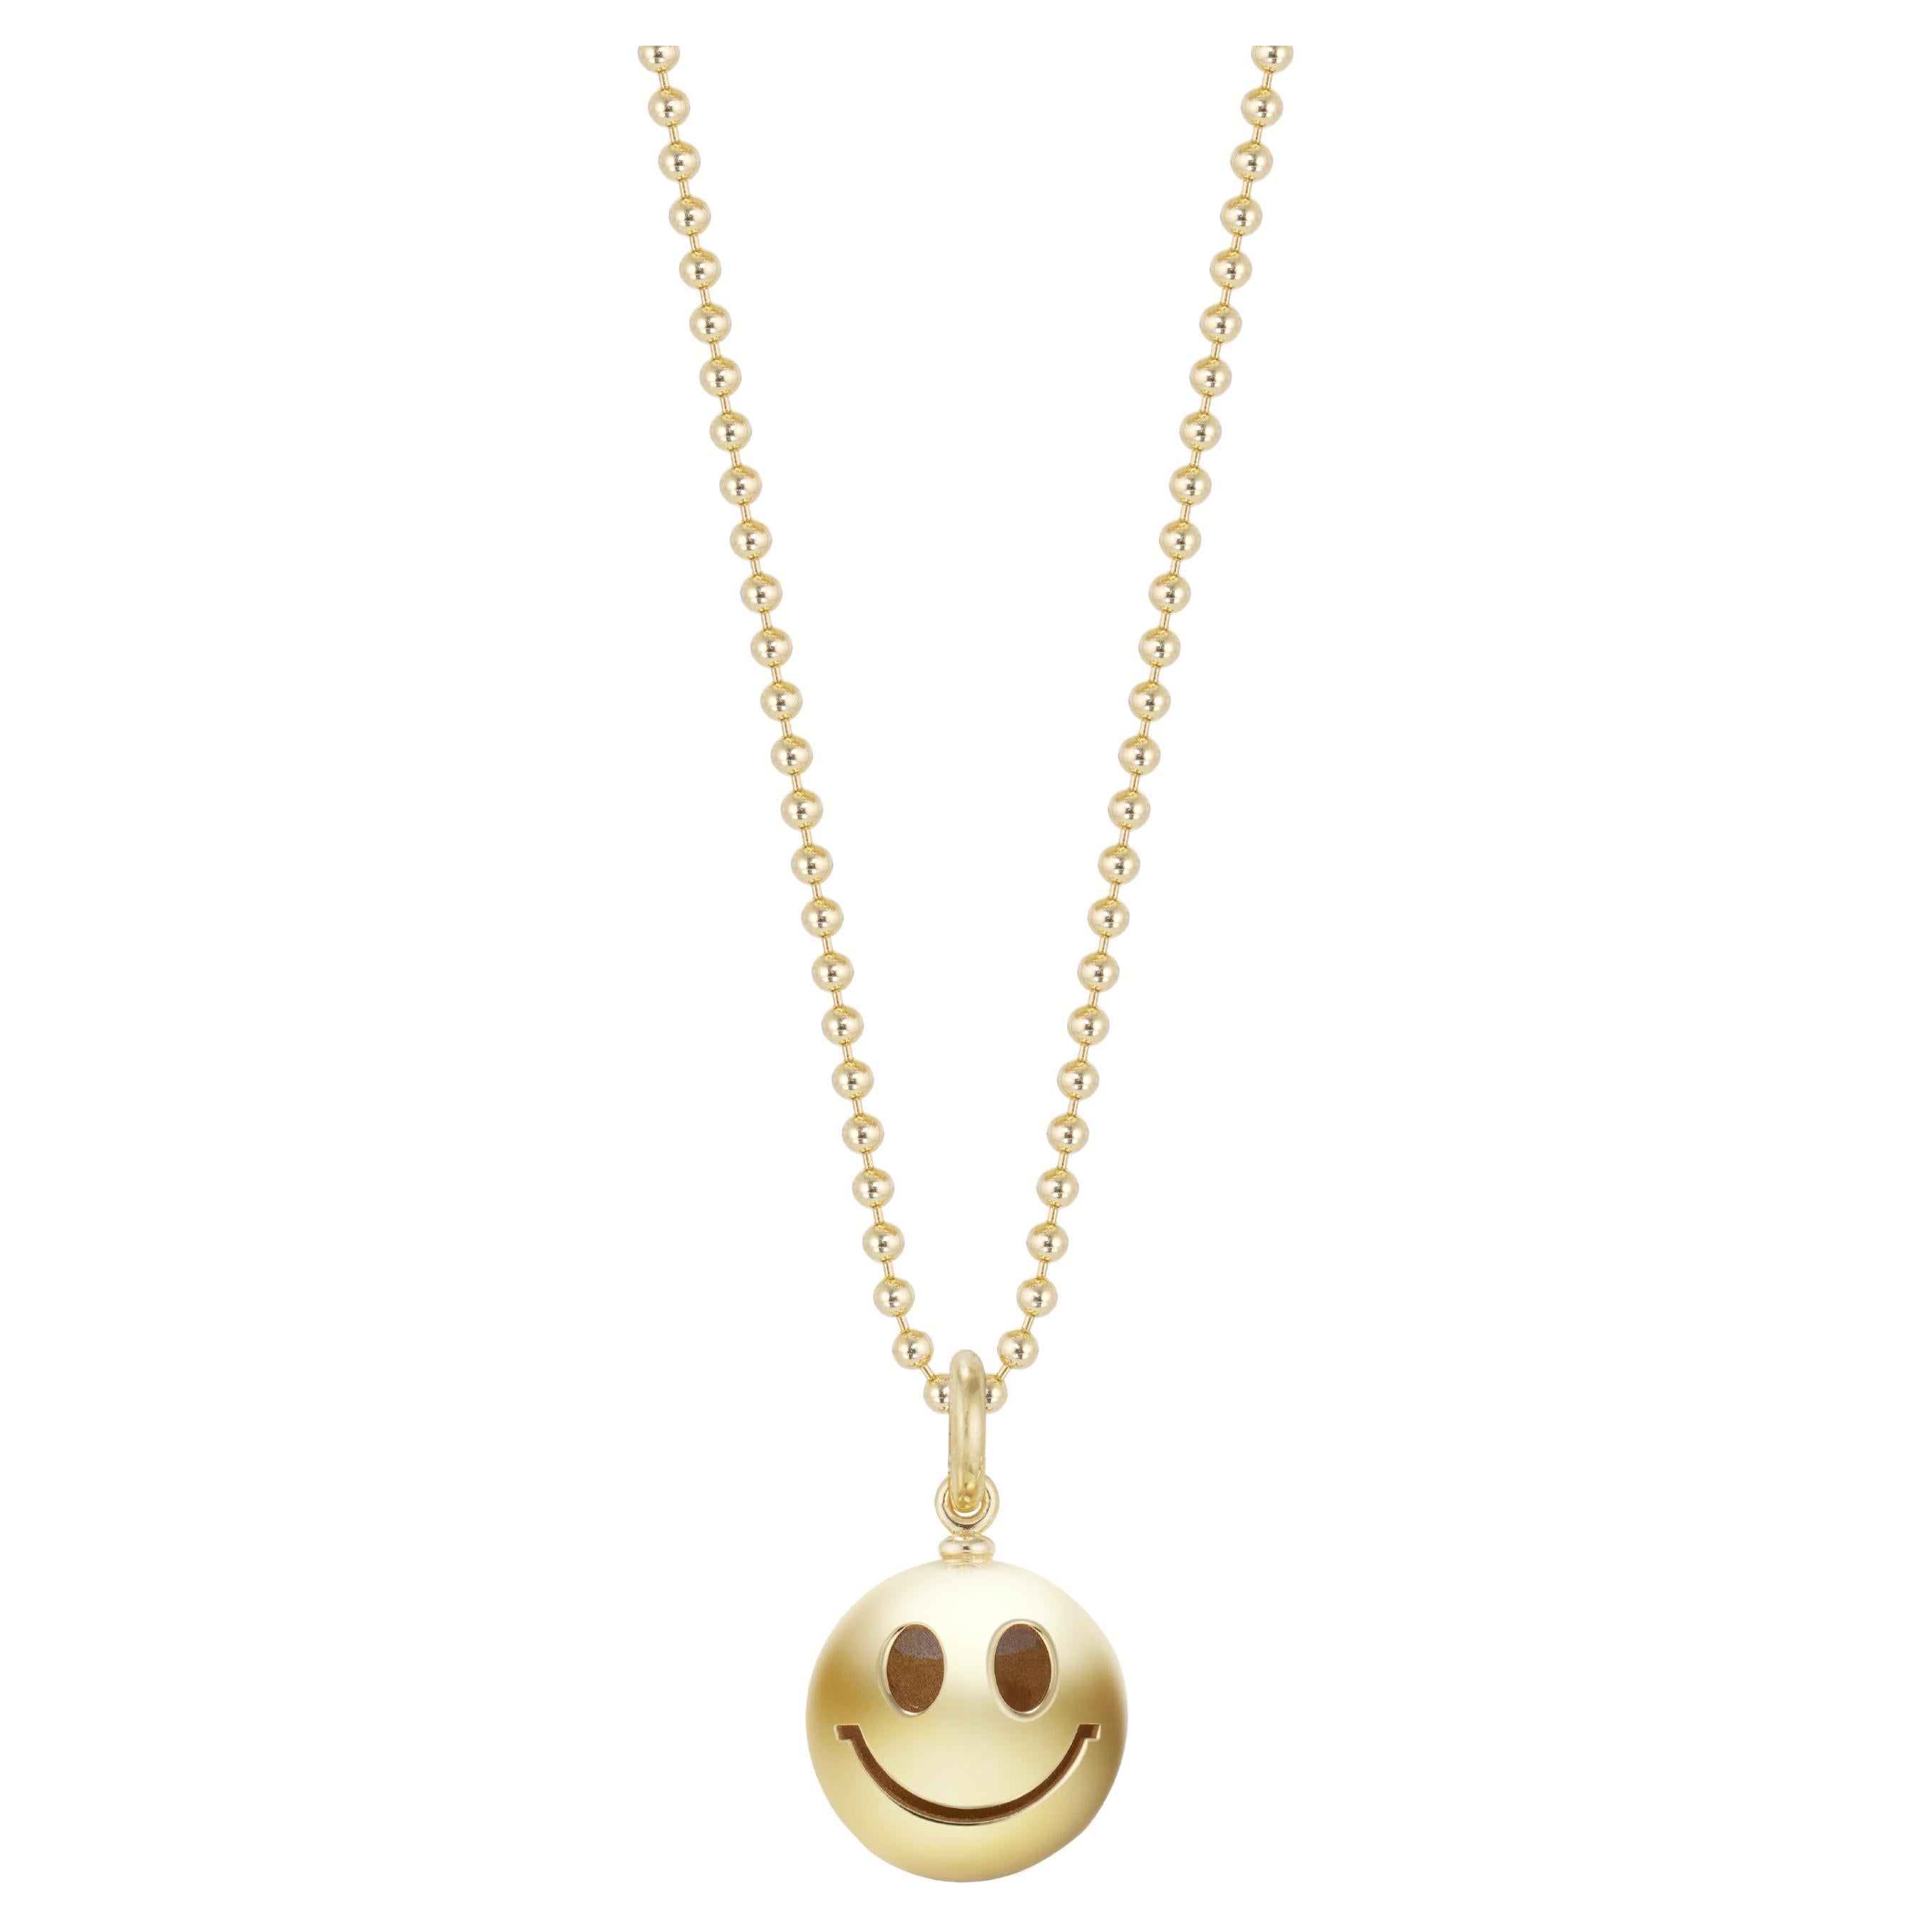 Zoma Design Mini 14 Carat Yellow Gold Smiley Face Pendant Necklace For Sale